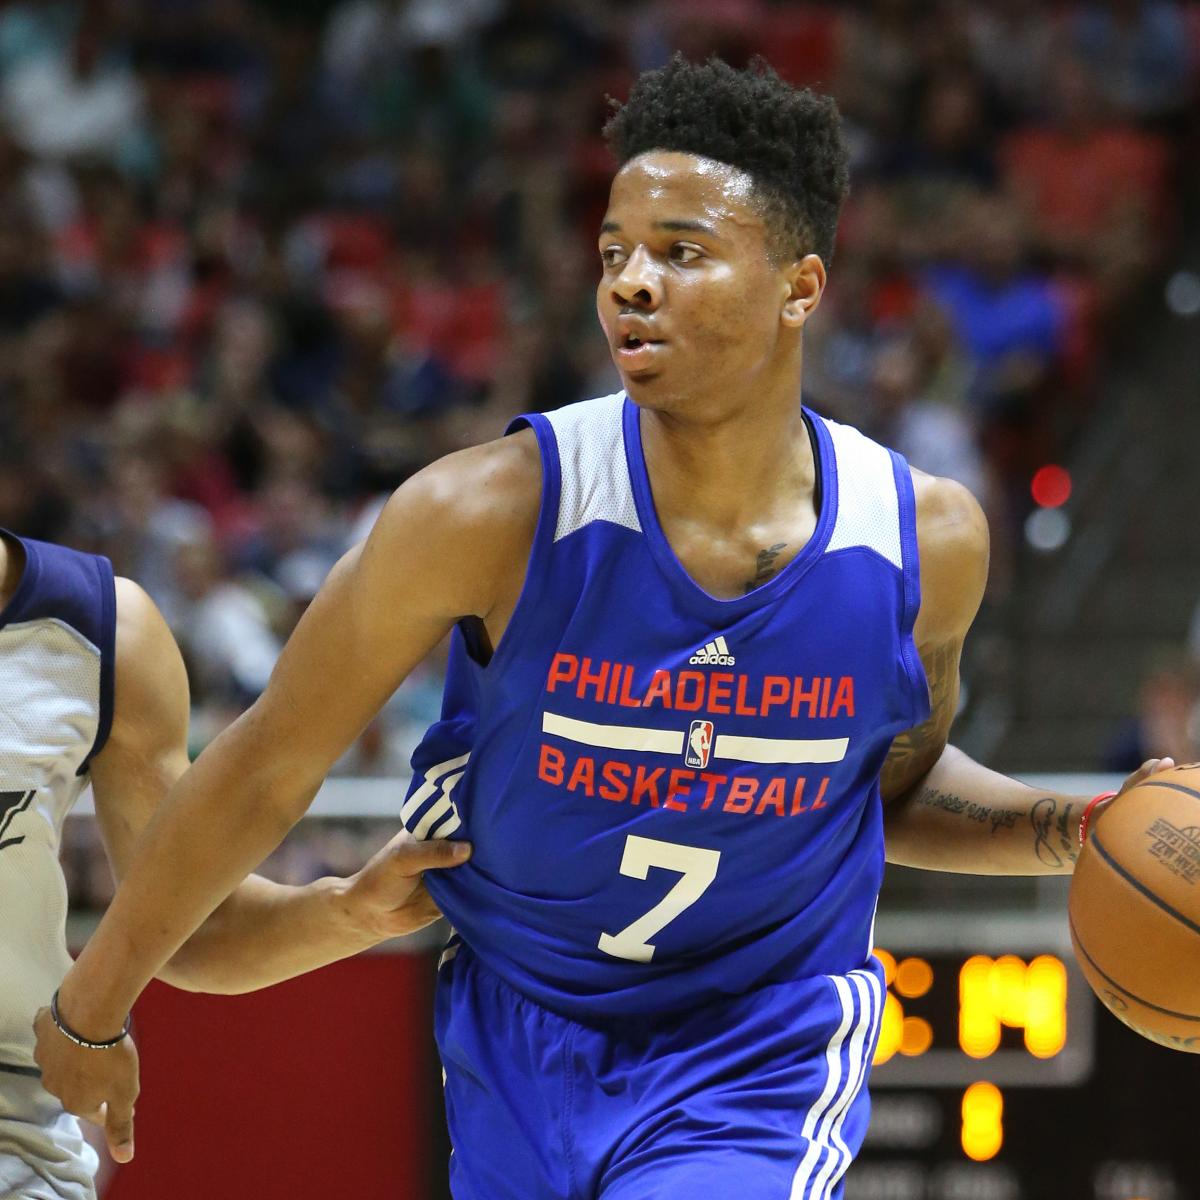 NBA Summer League 2017: Dates, Times, TV Schedule, Live Stream and More